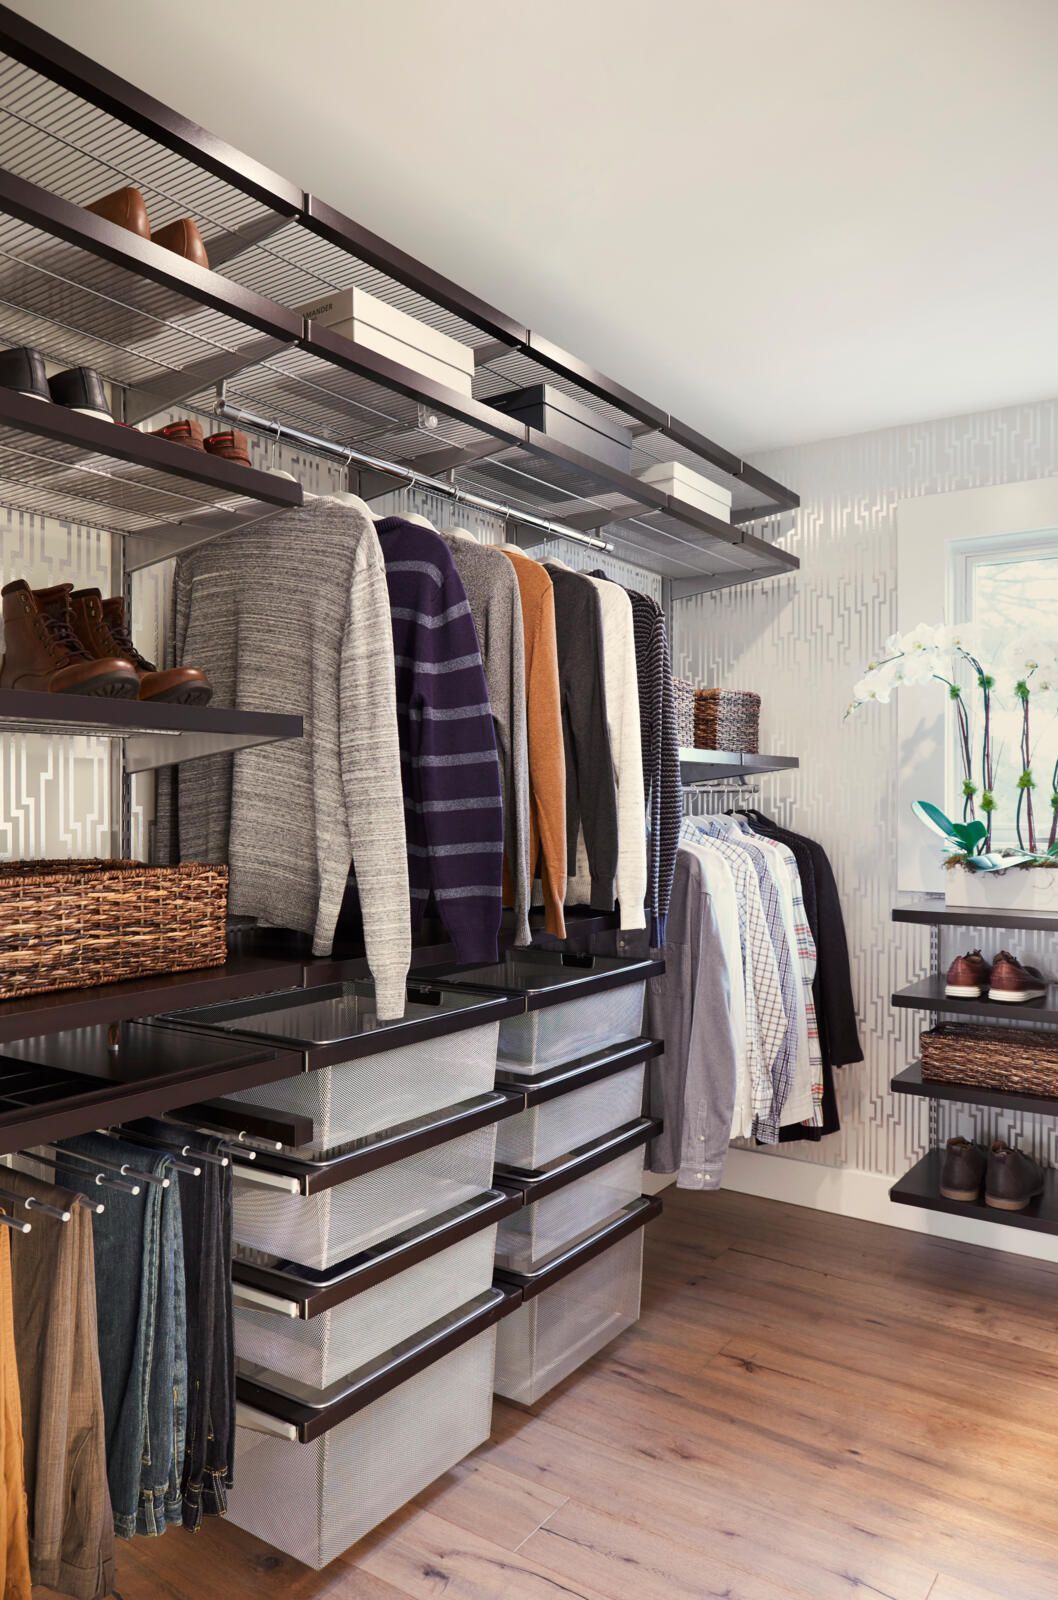 14 Of The Best Walk In Closet Organization Ideas For Your Storage Within 4 Shelf Closet Wardrobes (View 9 of 15)